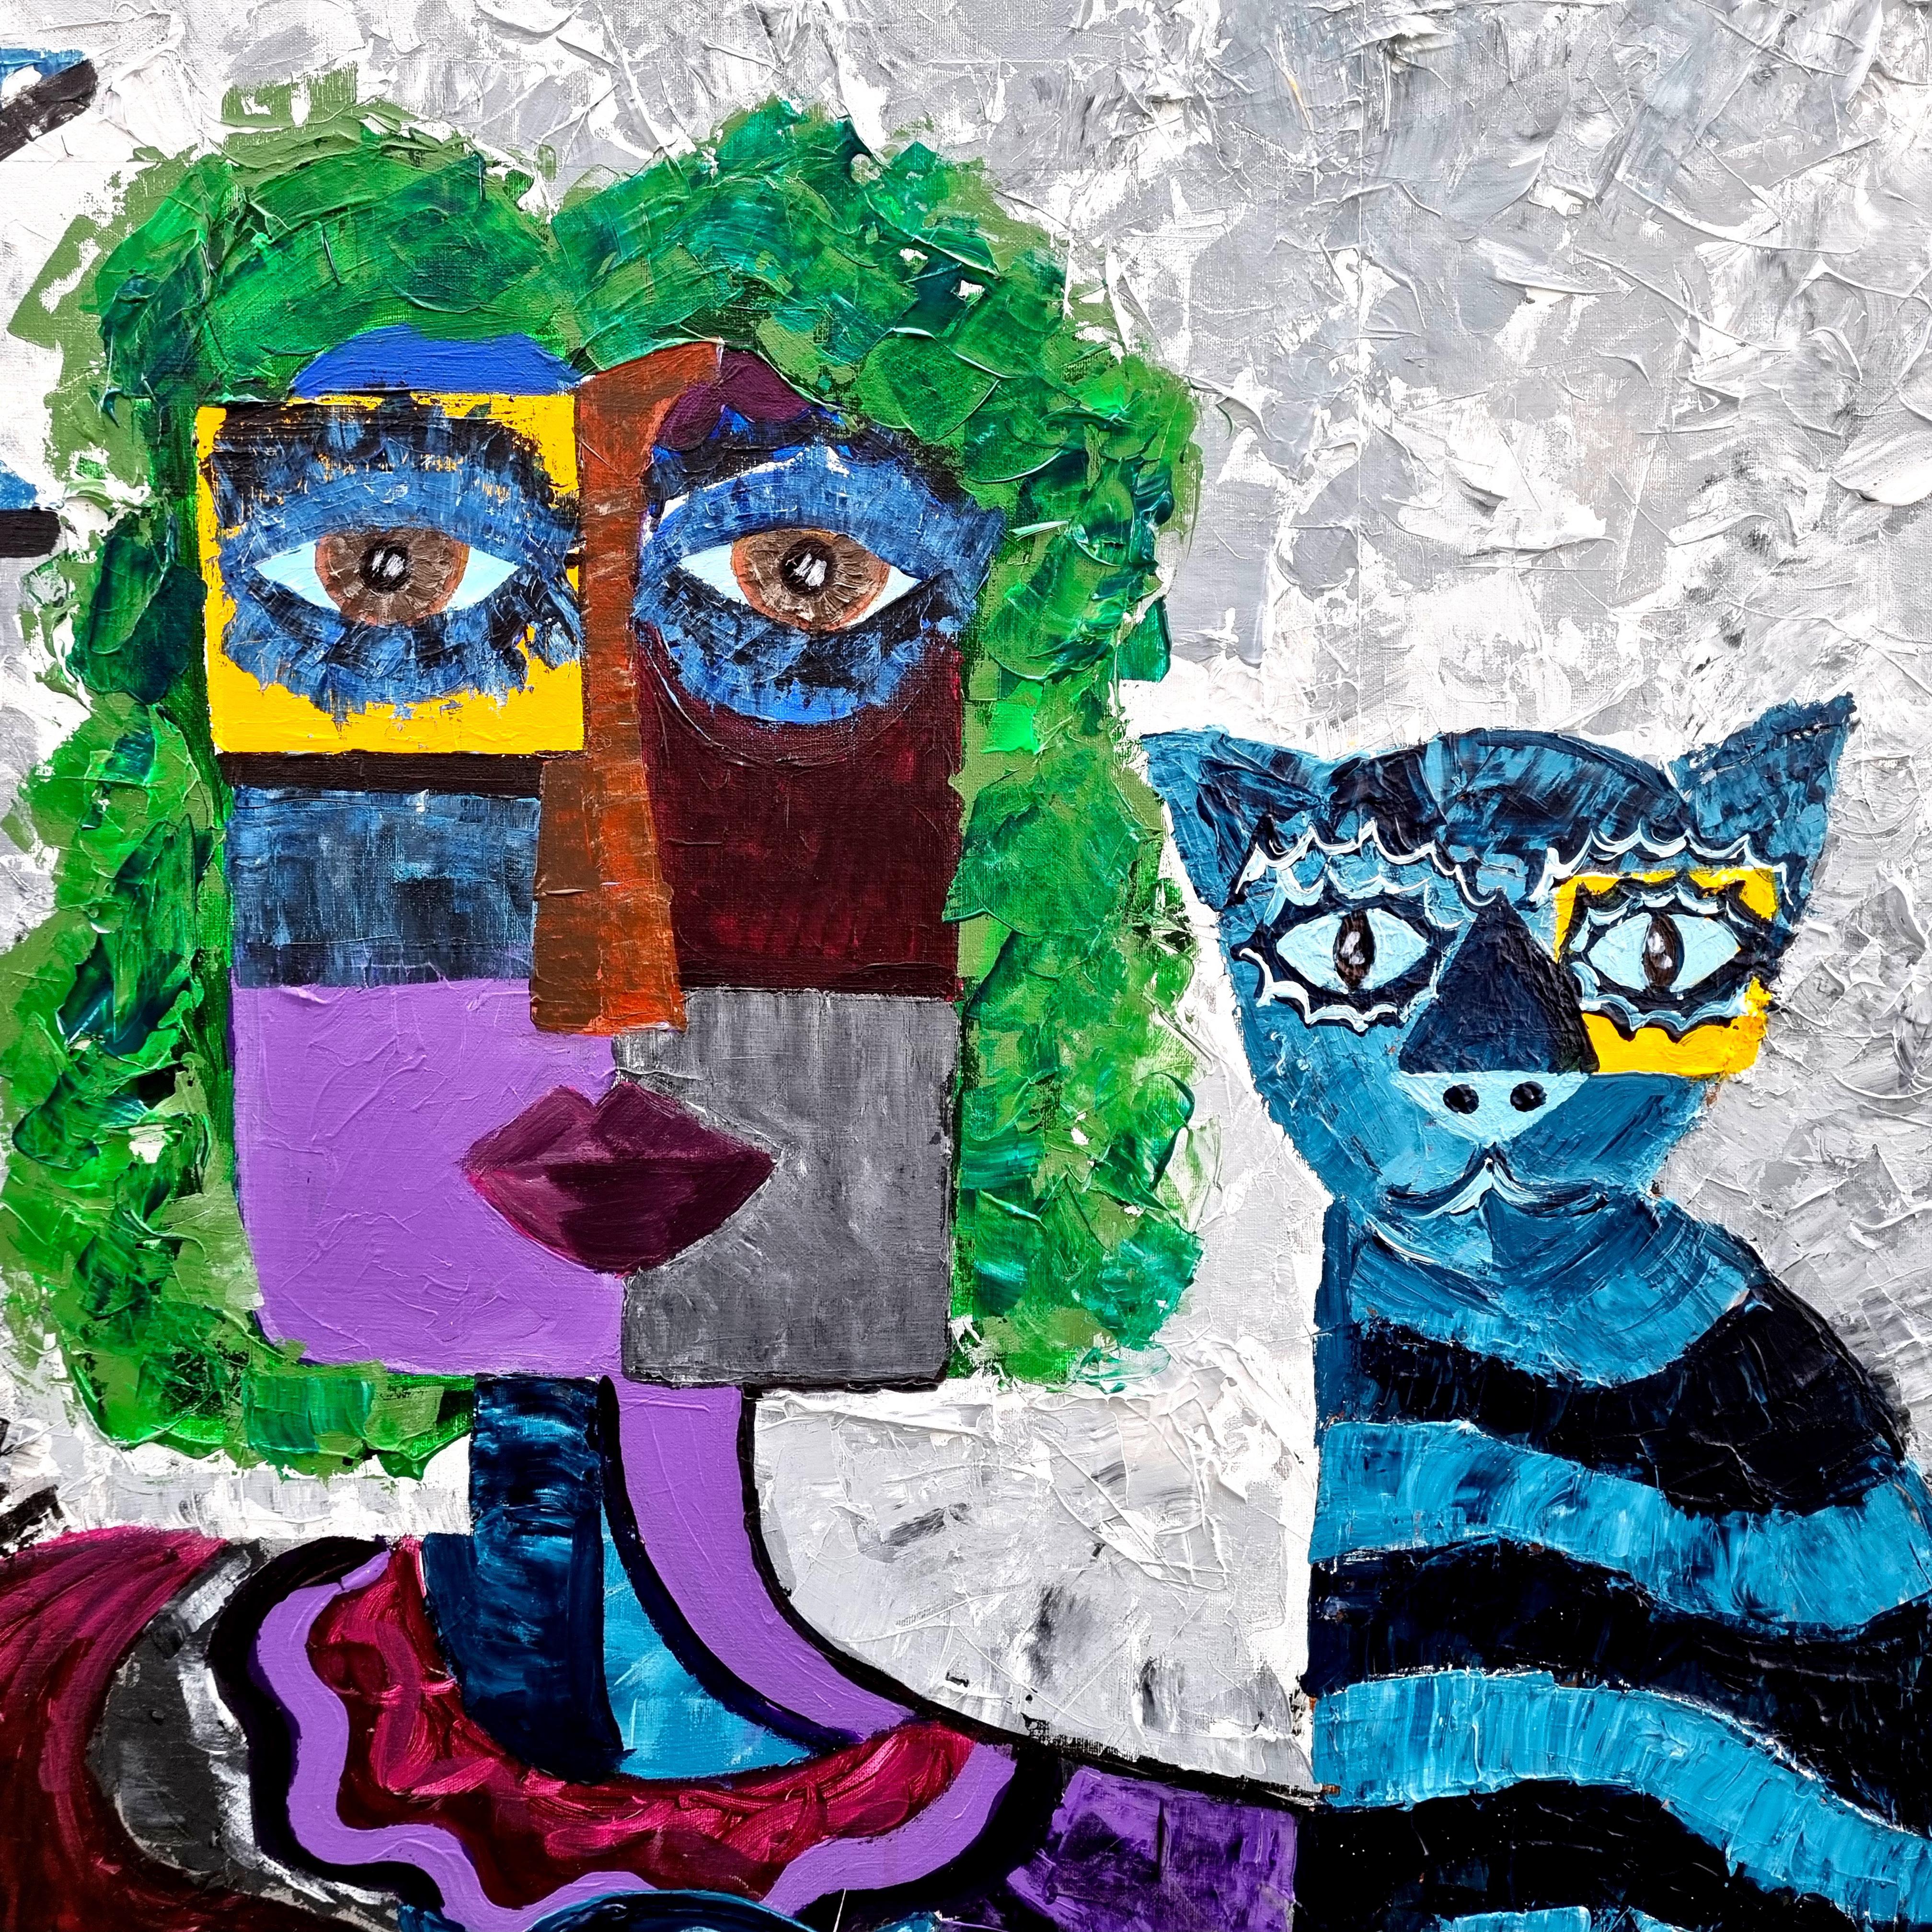 90.-Philip with his cats. 130 x. 130 cm original acrylic painting

Born in Badalona (Barcelona).
Photographer and advertising film director.
Founding partner of the advertising production company La Cosa de las Peliculas: 
He has directed